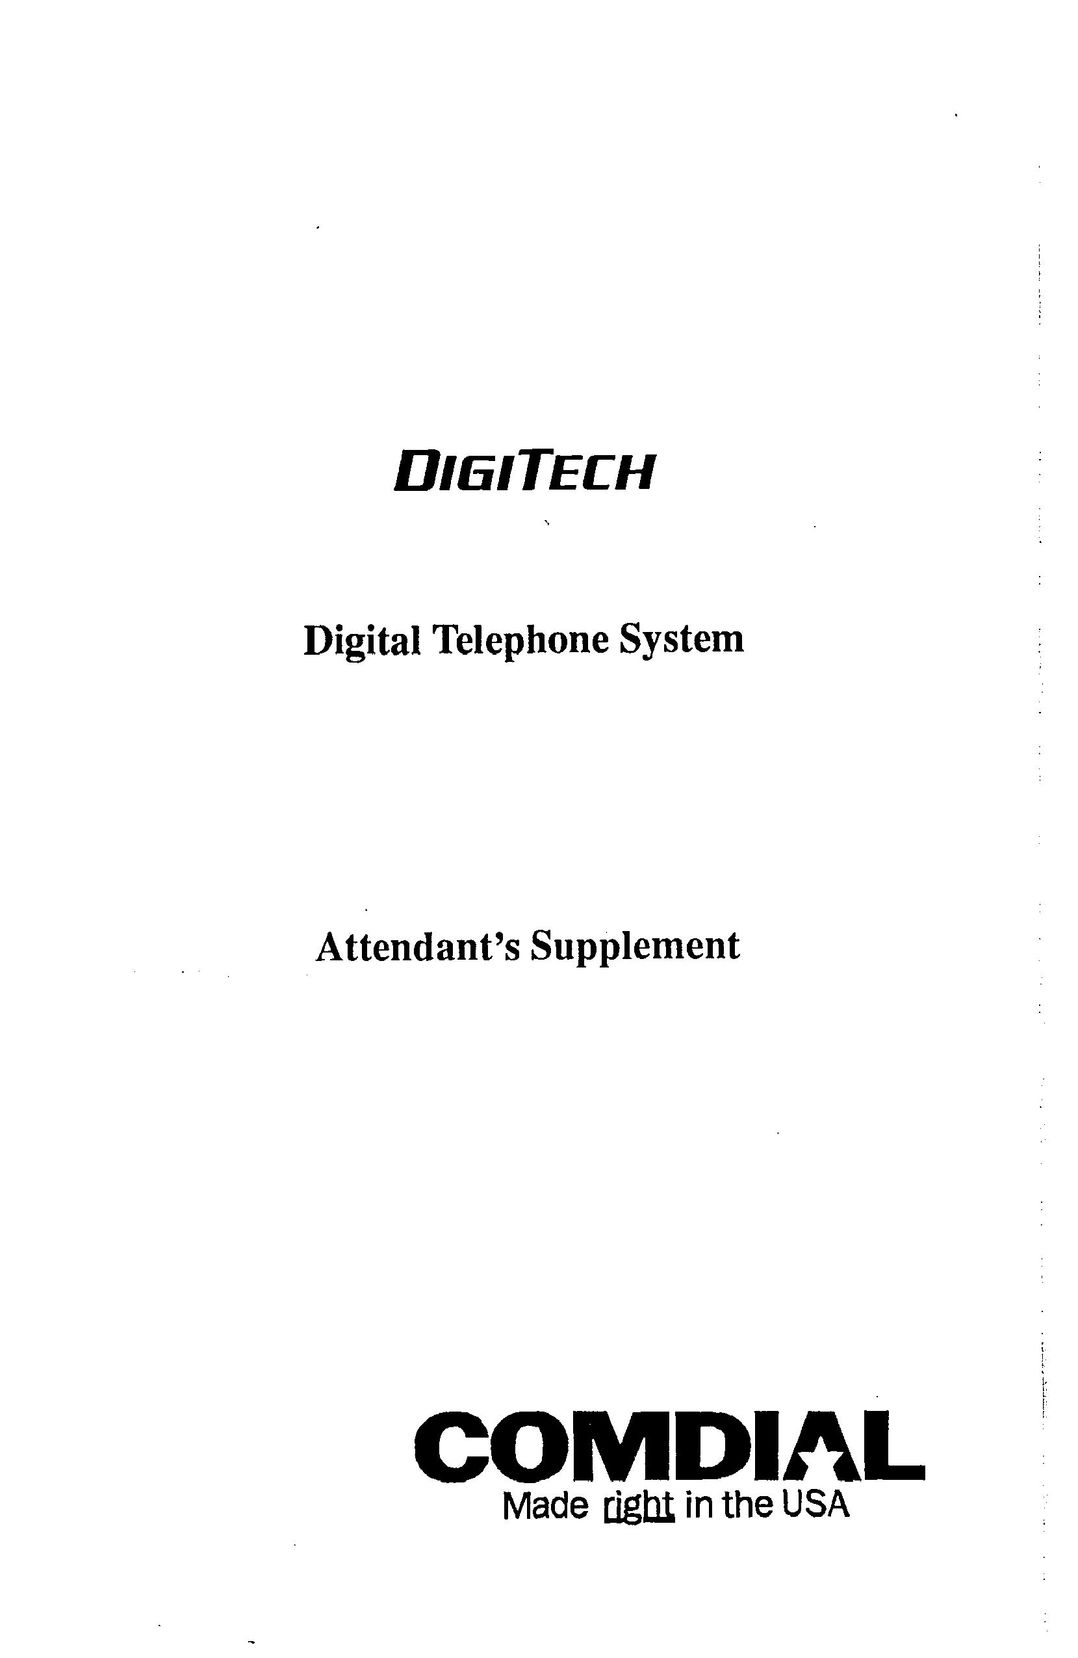 DigiTech CO408 Cell Phone User Manual